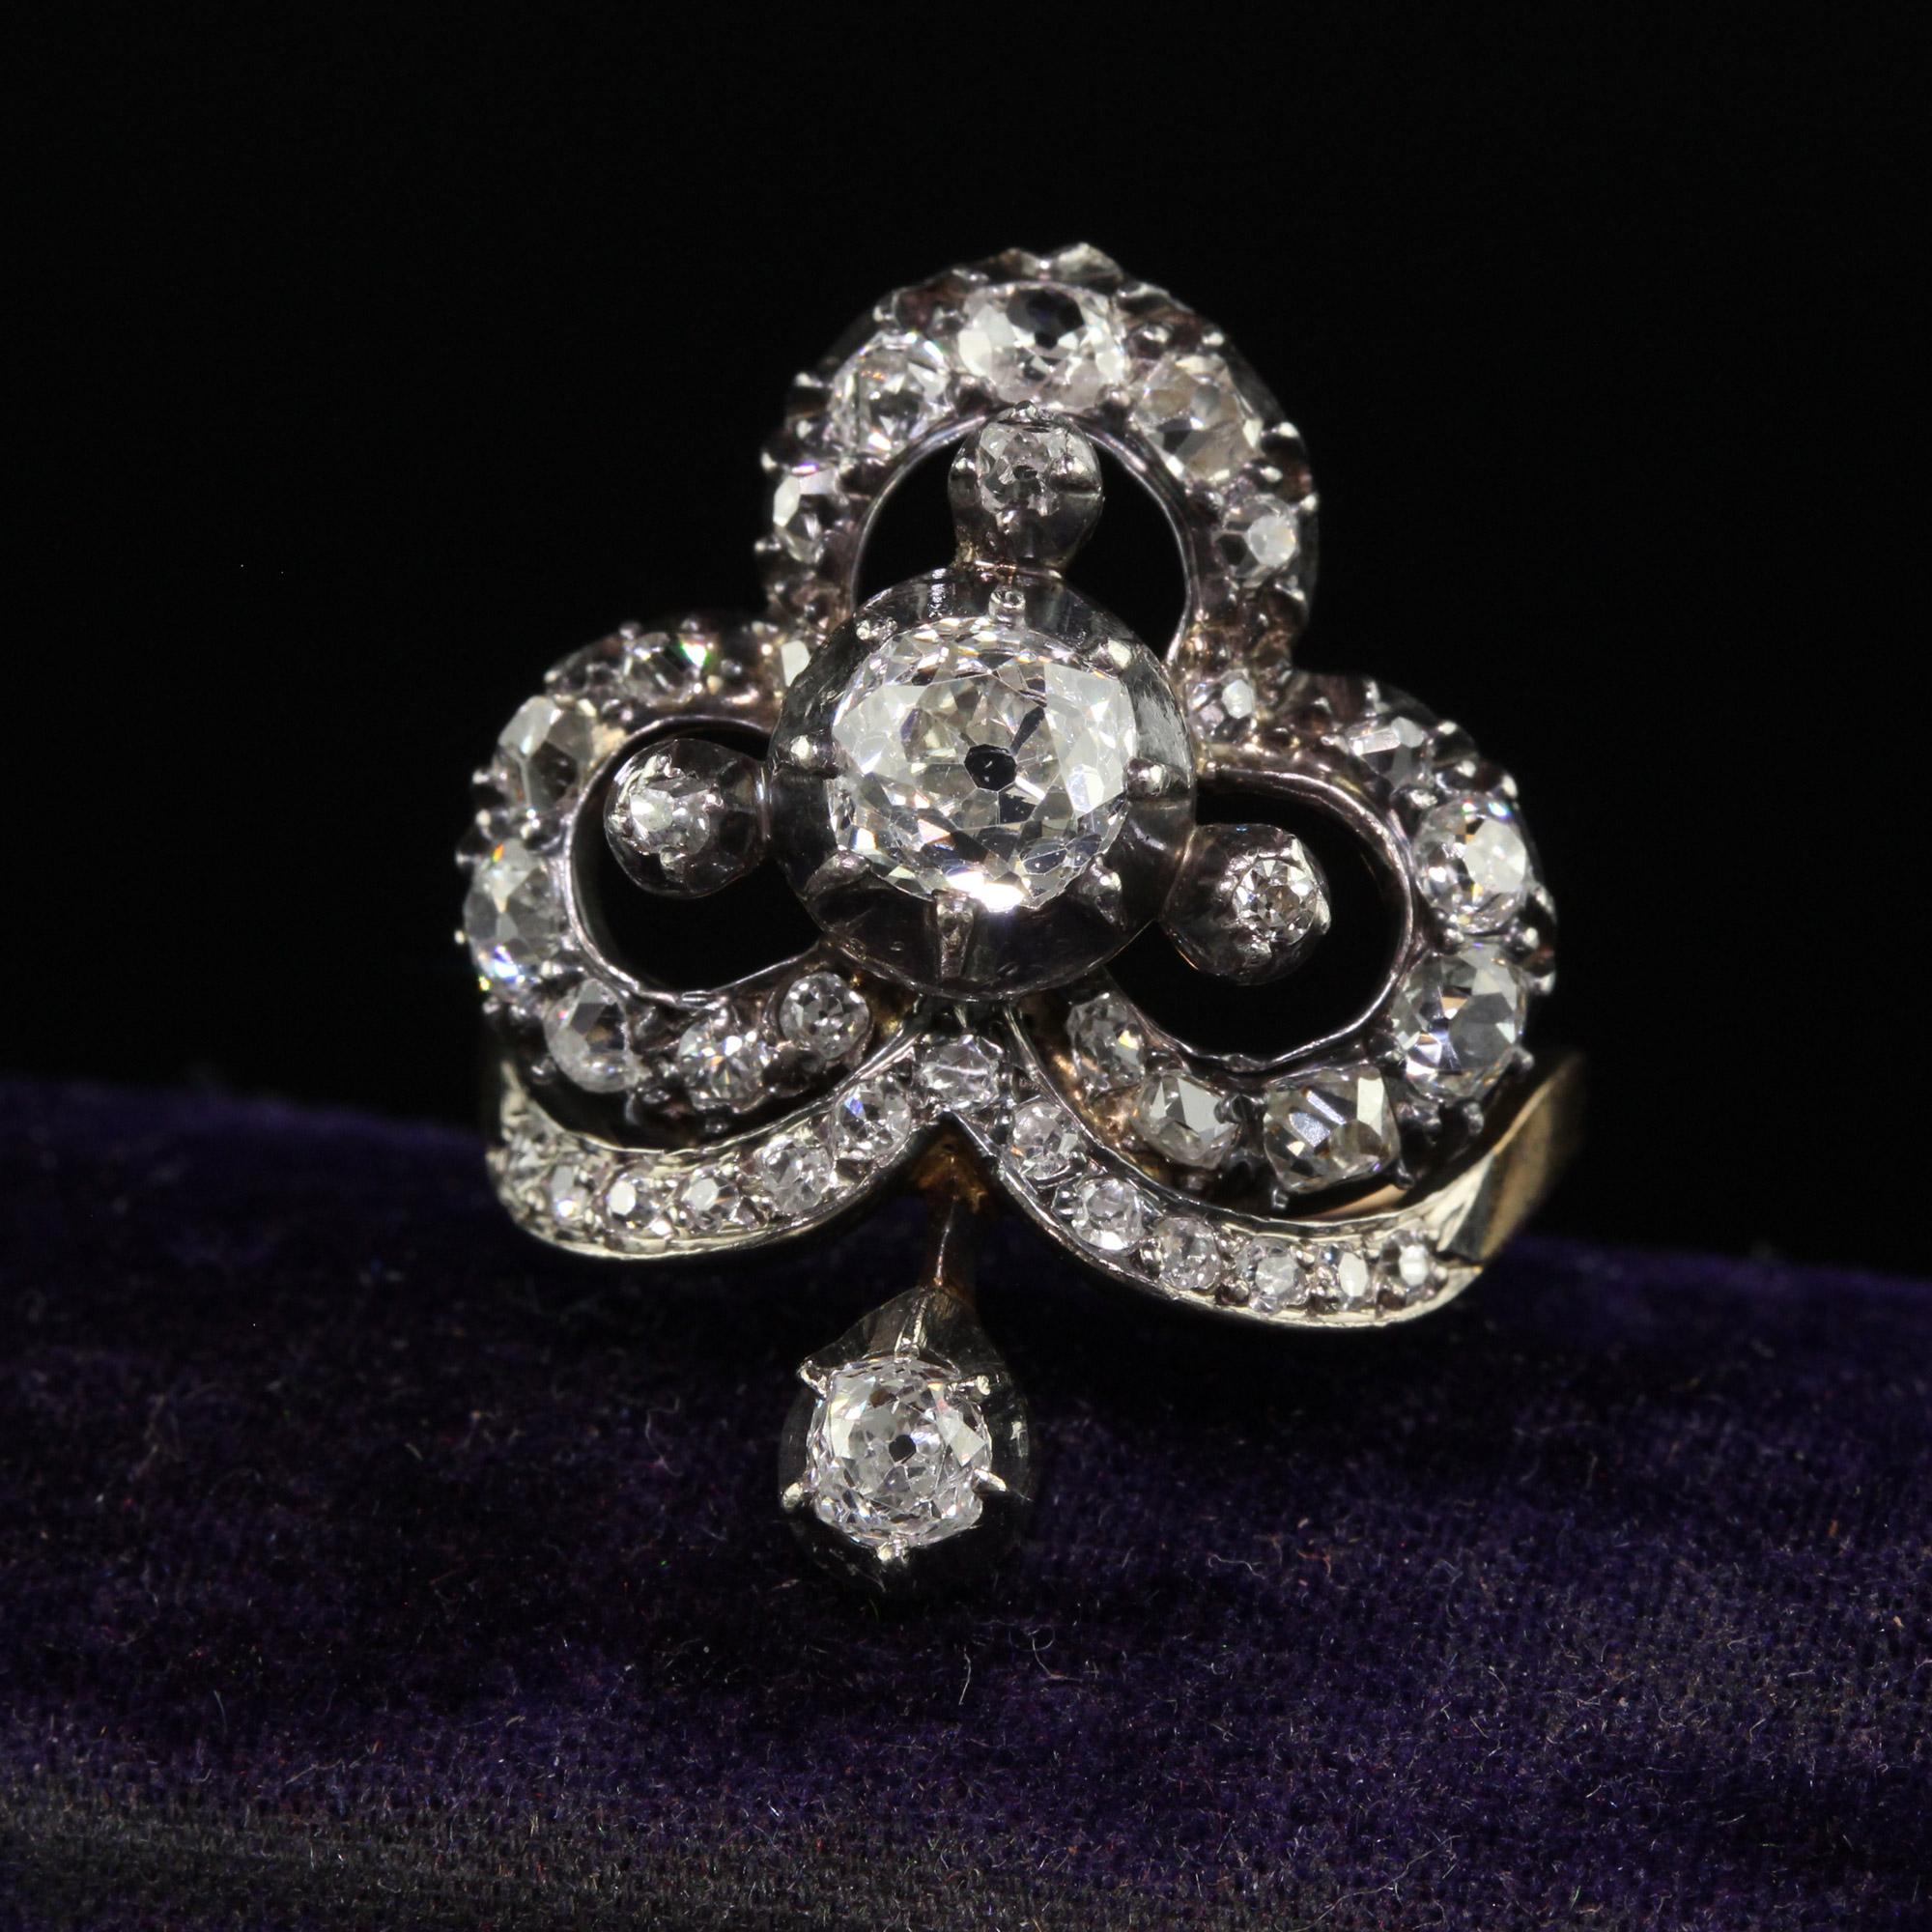 Beautiful Antique Victorian 18K Yellow Gold Silver Top Old Mine Diamond Clover Ring. This gorgeous early Victorian diamond clover ring is crafted in 18k yellow gold and silver top. The center of this ring holds a gorgeous chunky old mine cut